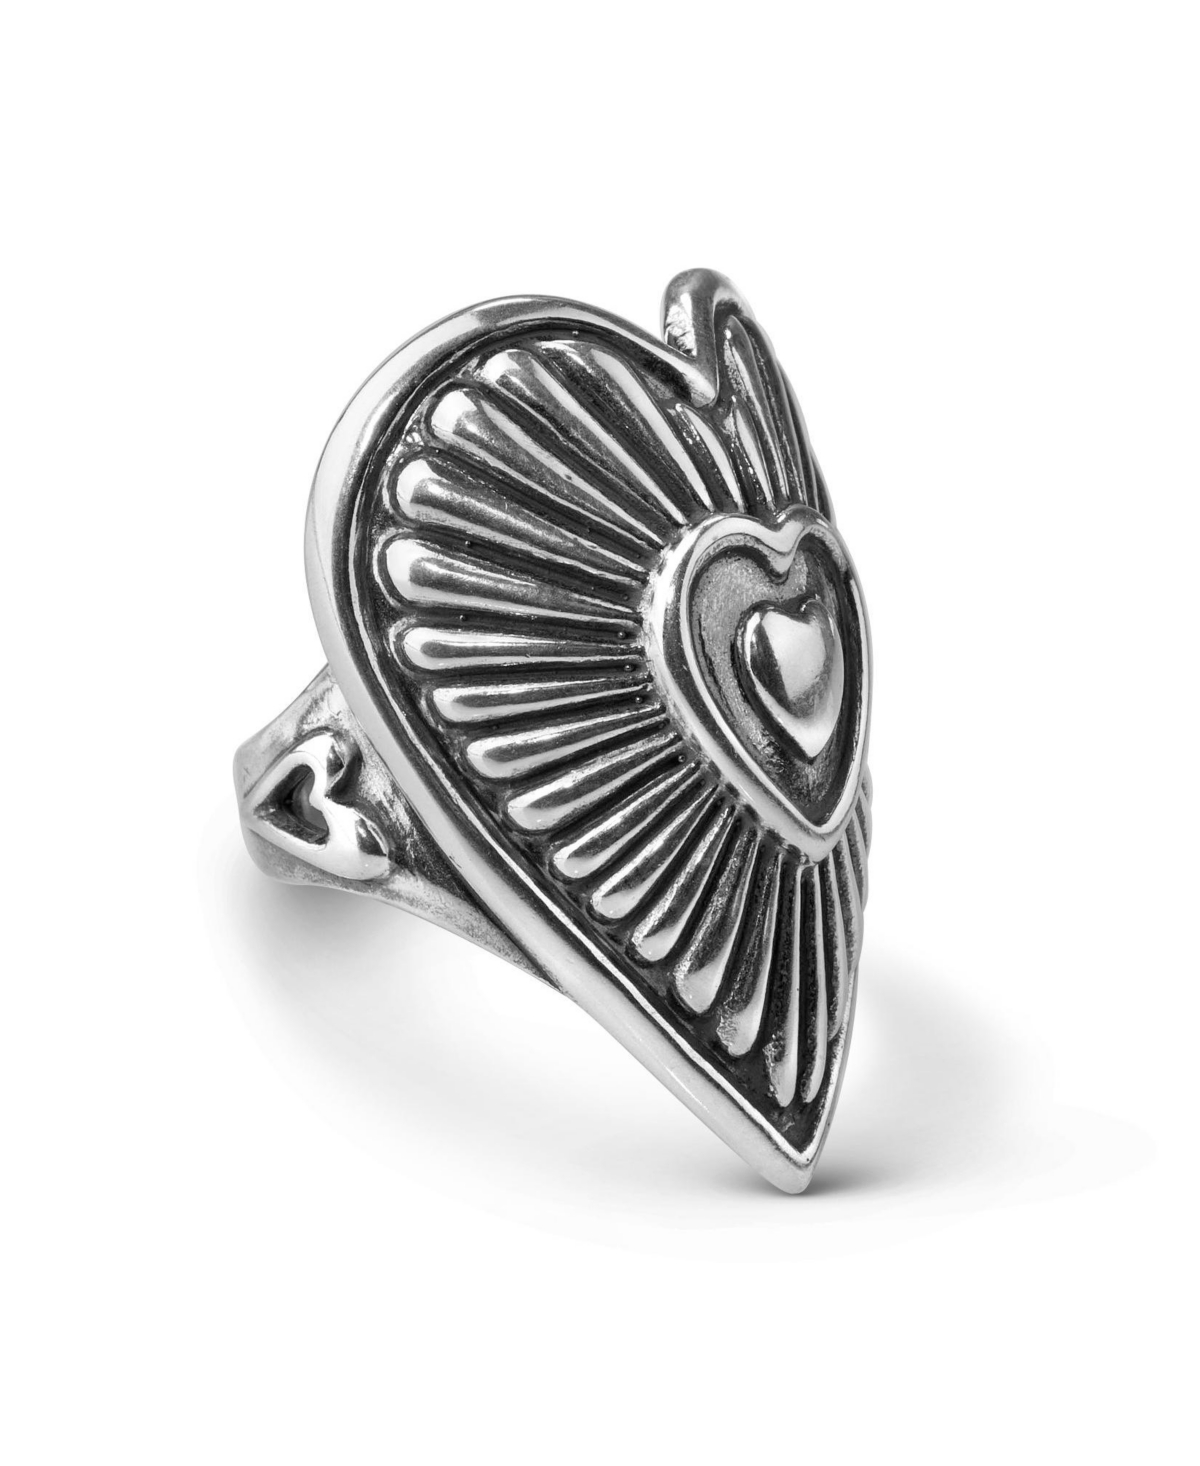 Sterling Silver Women's Statement Ring Heart and Sunburst Design, Sizes 5-10 - Sterling silver